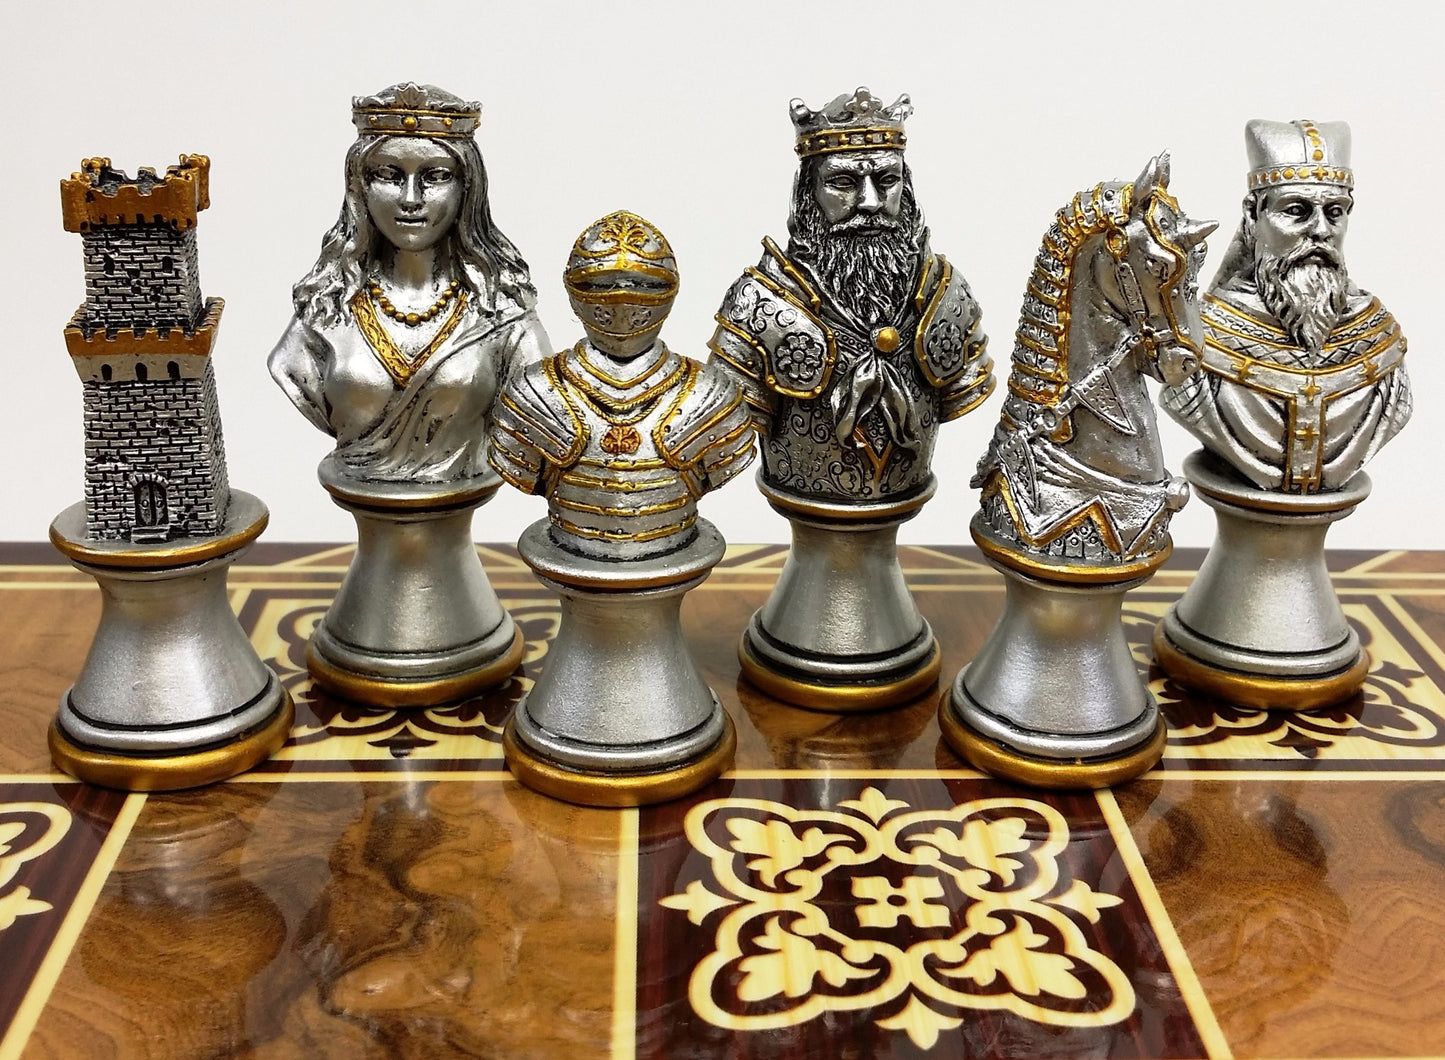 Medieval Times Crusade Gold & Silver Busts Chess Set 17" Burlwood Color Board